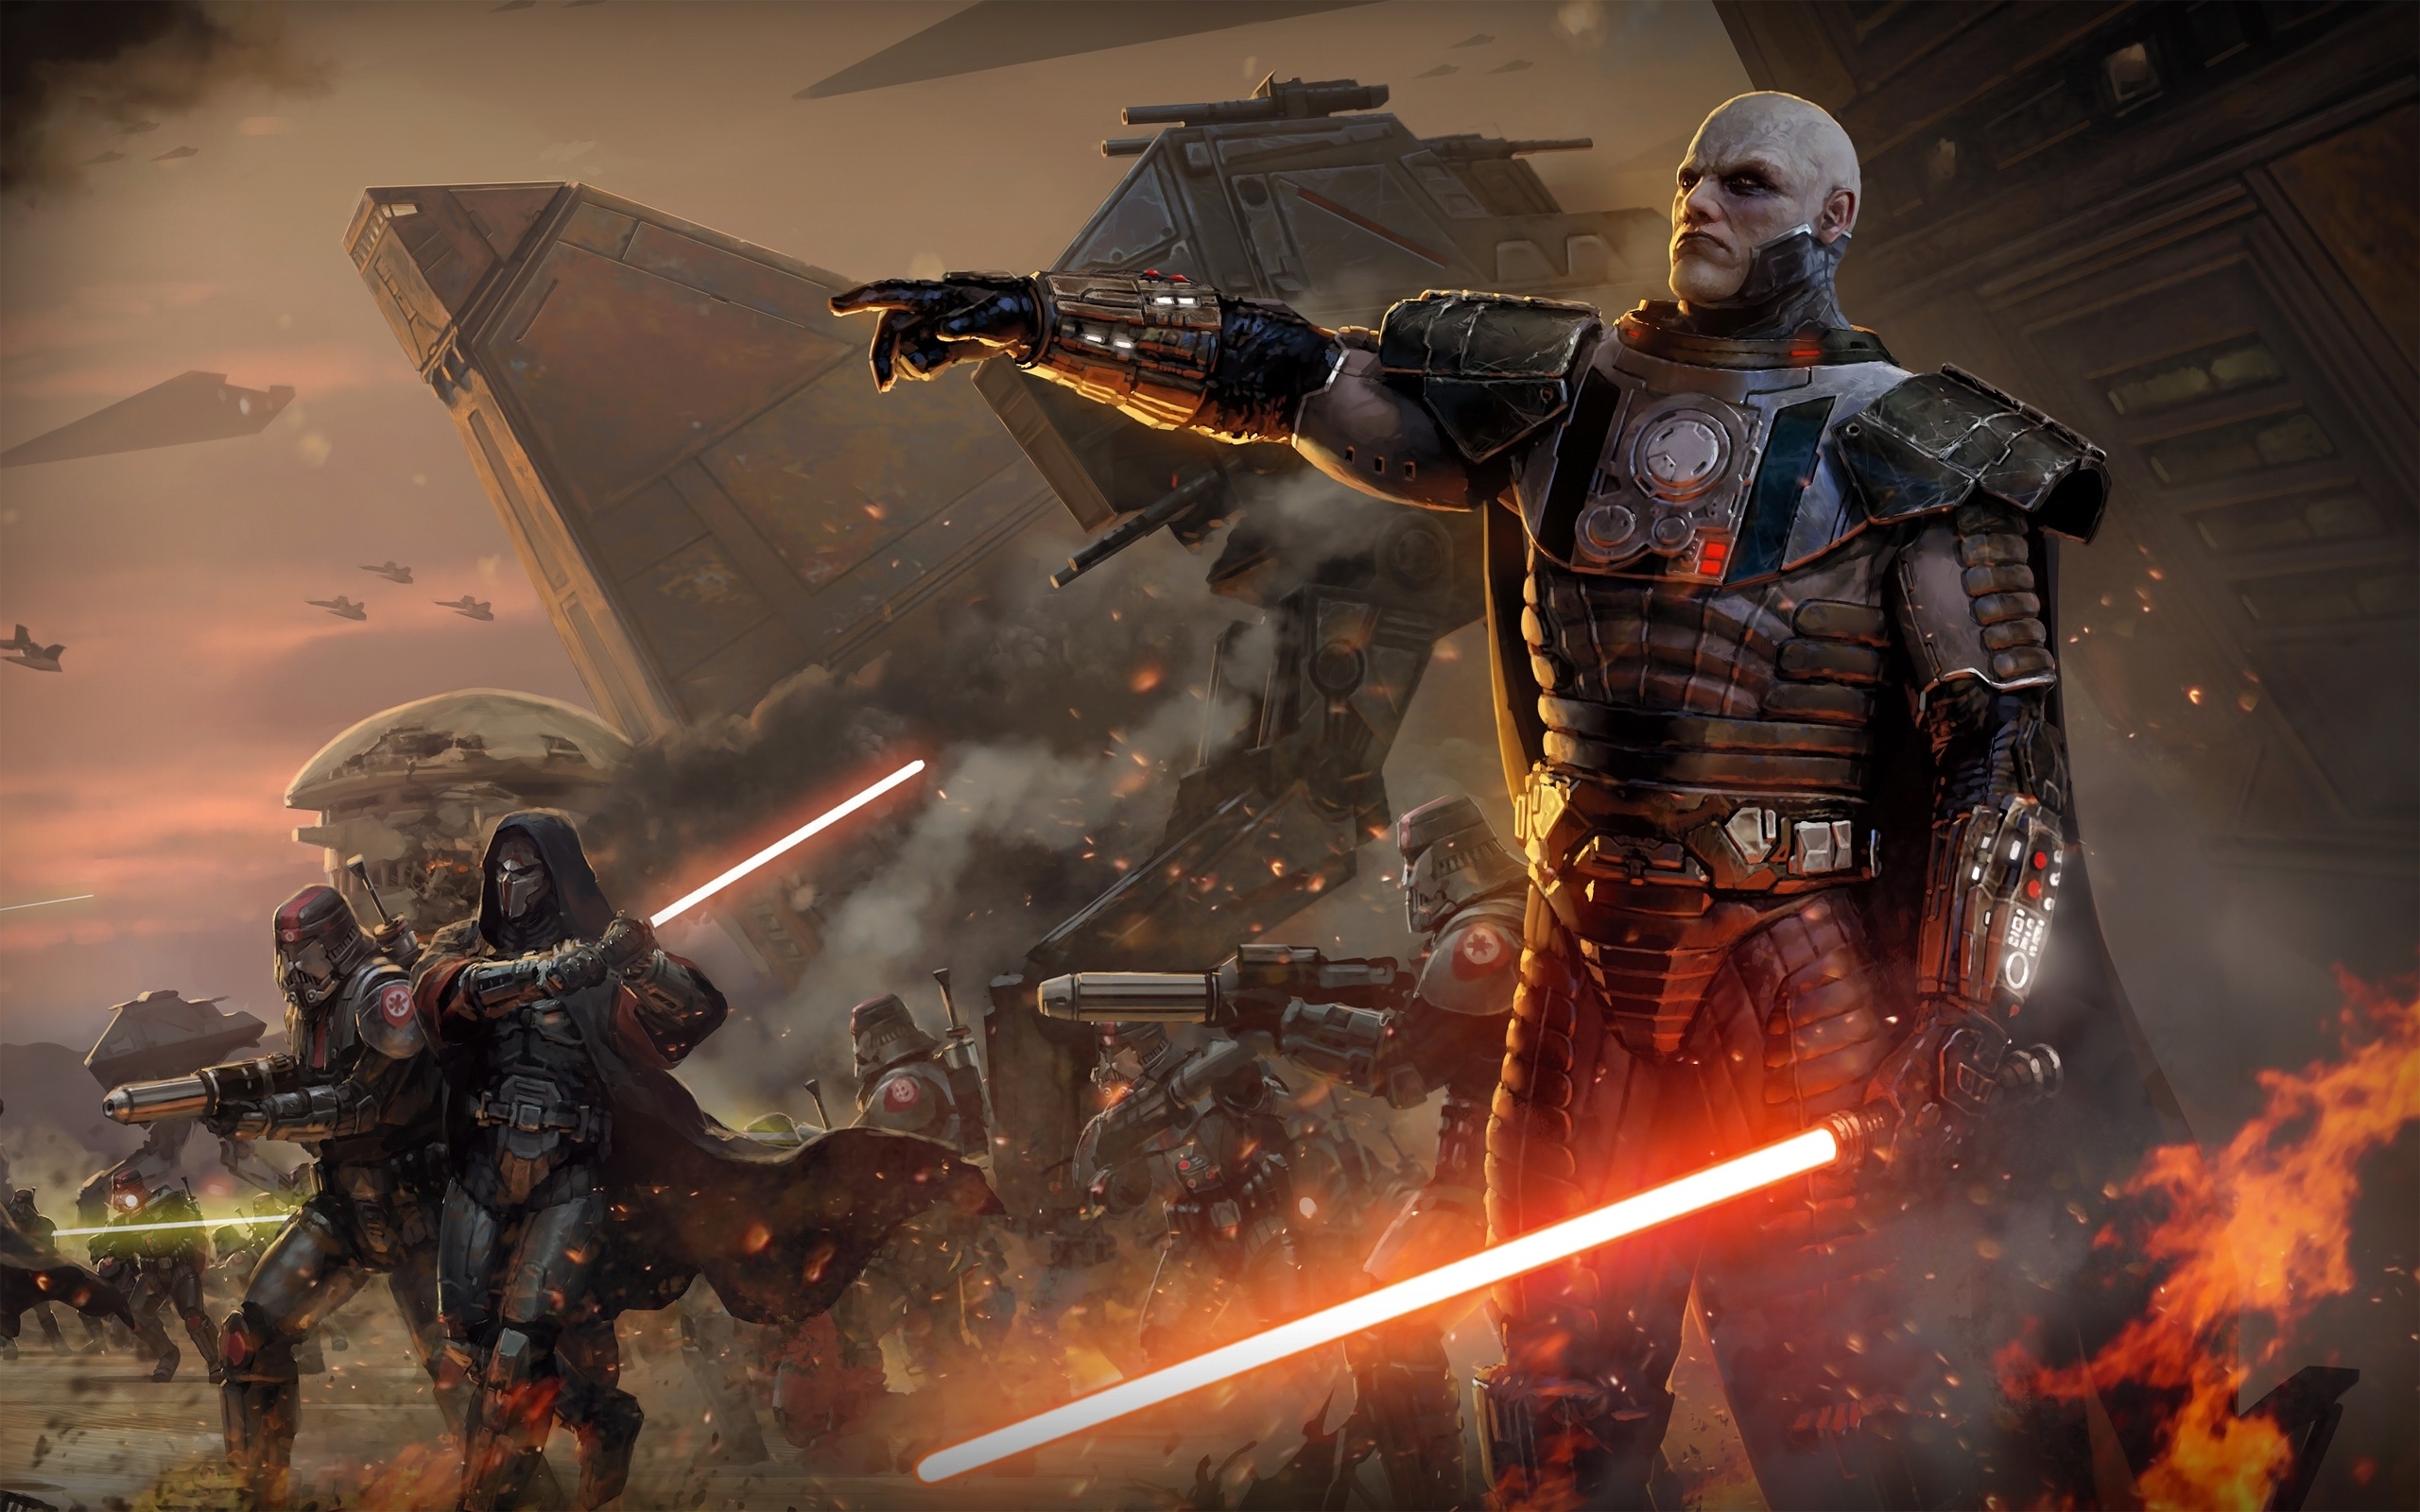 10 Top Star Wars The Old Republic Backgrounds FULL HD 1920×1080 For PC Background